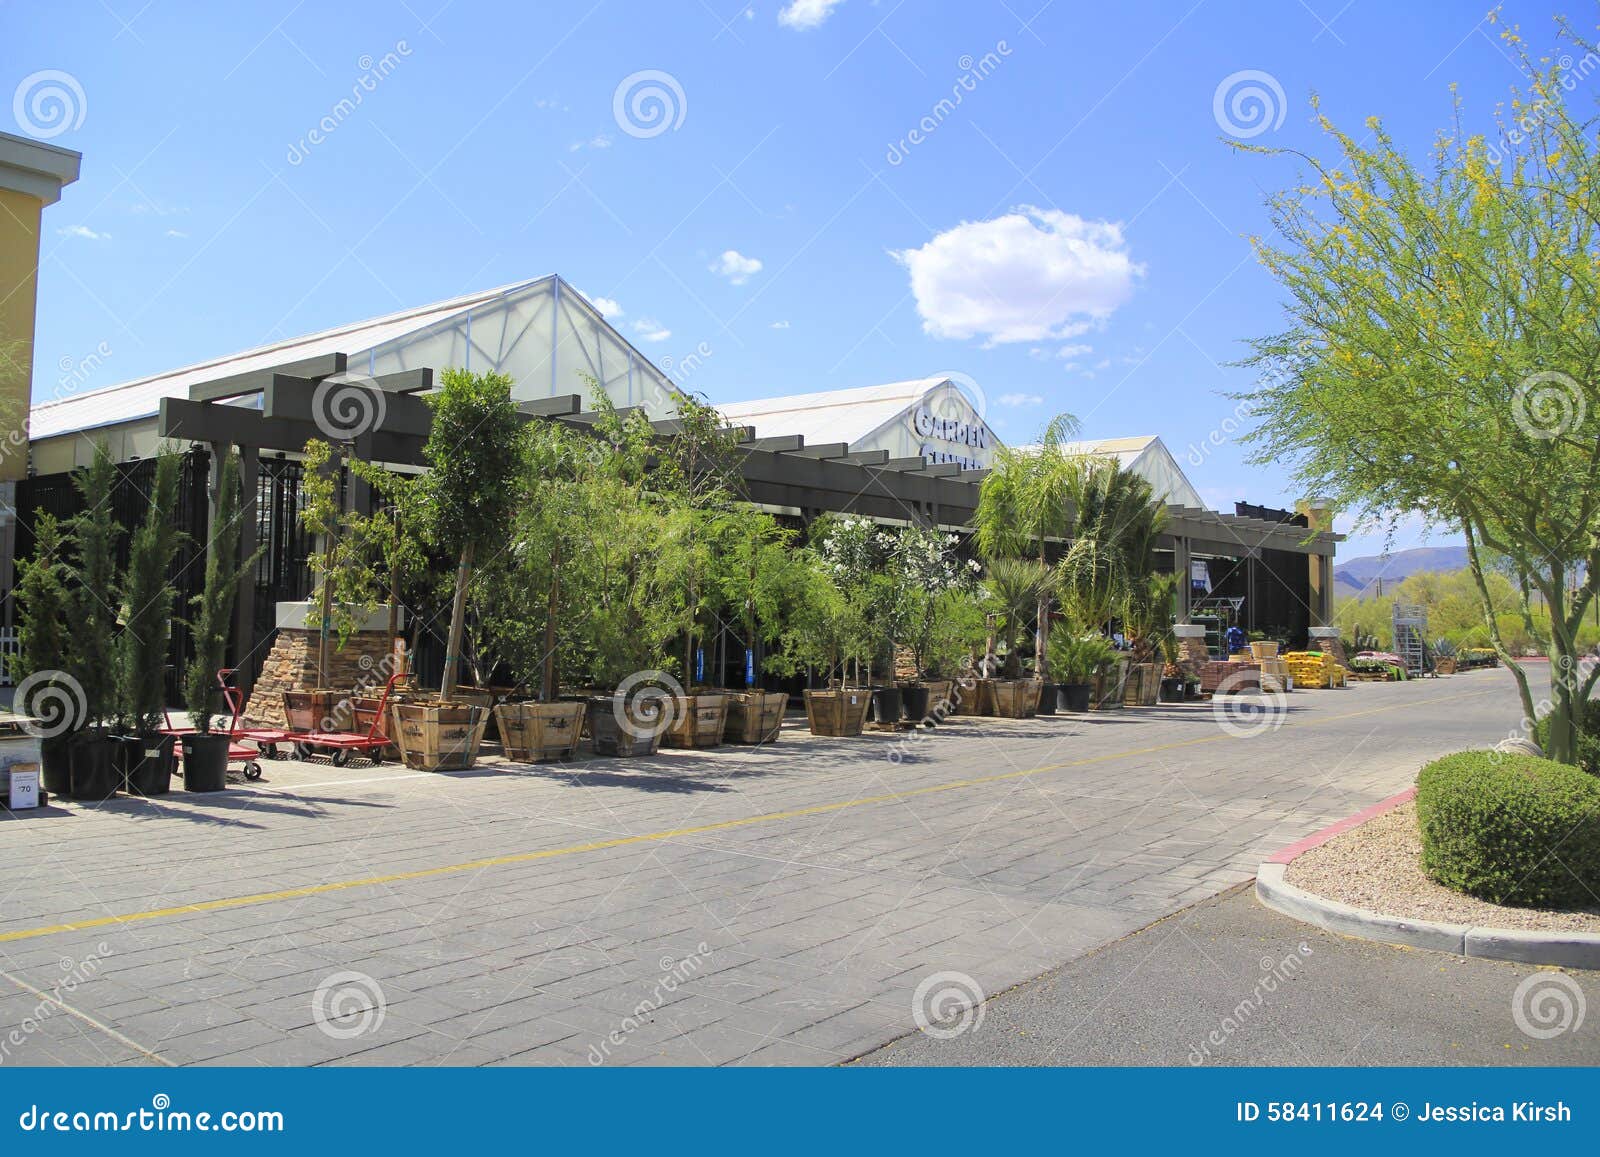 Lowes Home Improvement Store Garden Center Editorial Stock Image